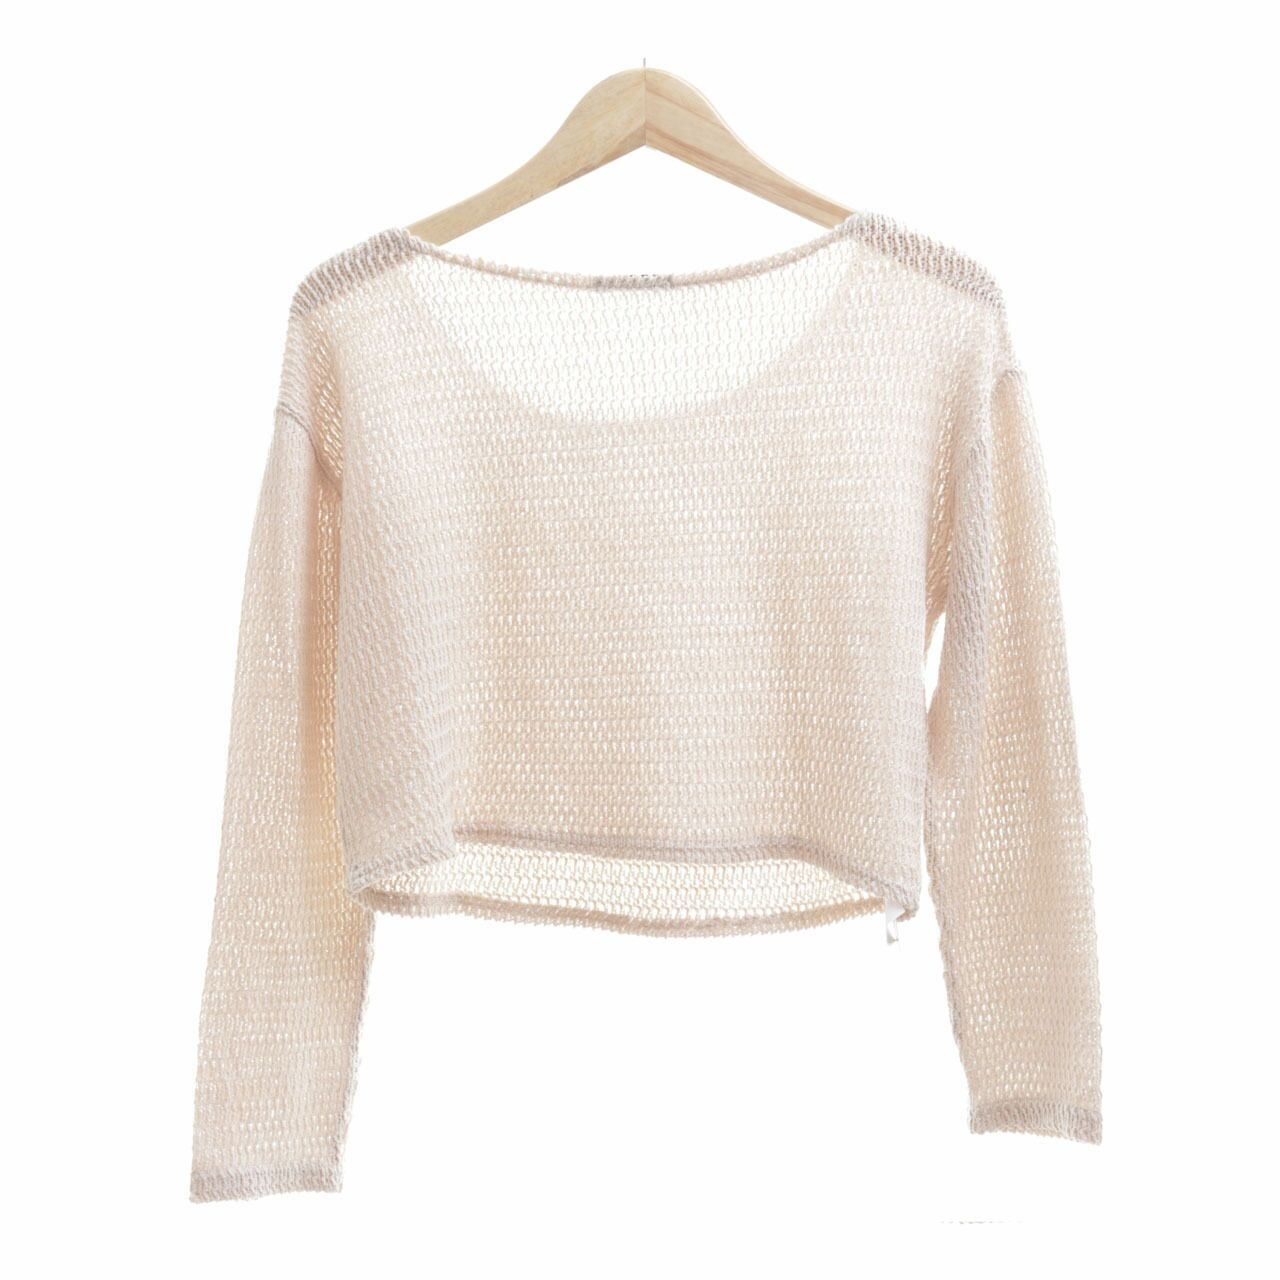 Ingni Beige Knit Perforated Blouse